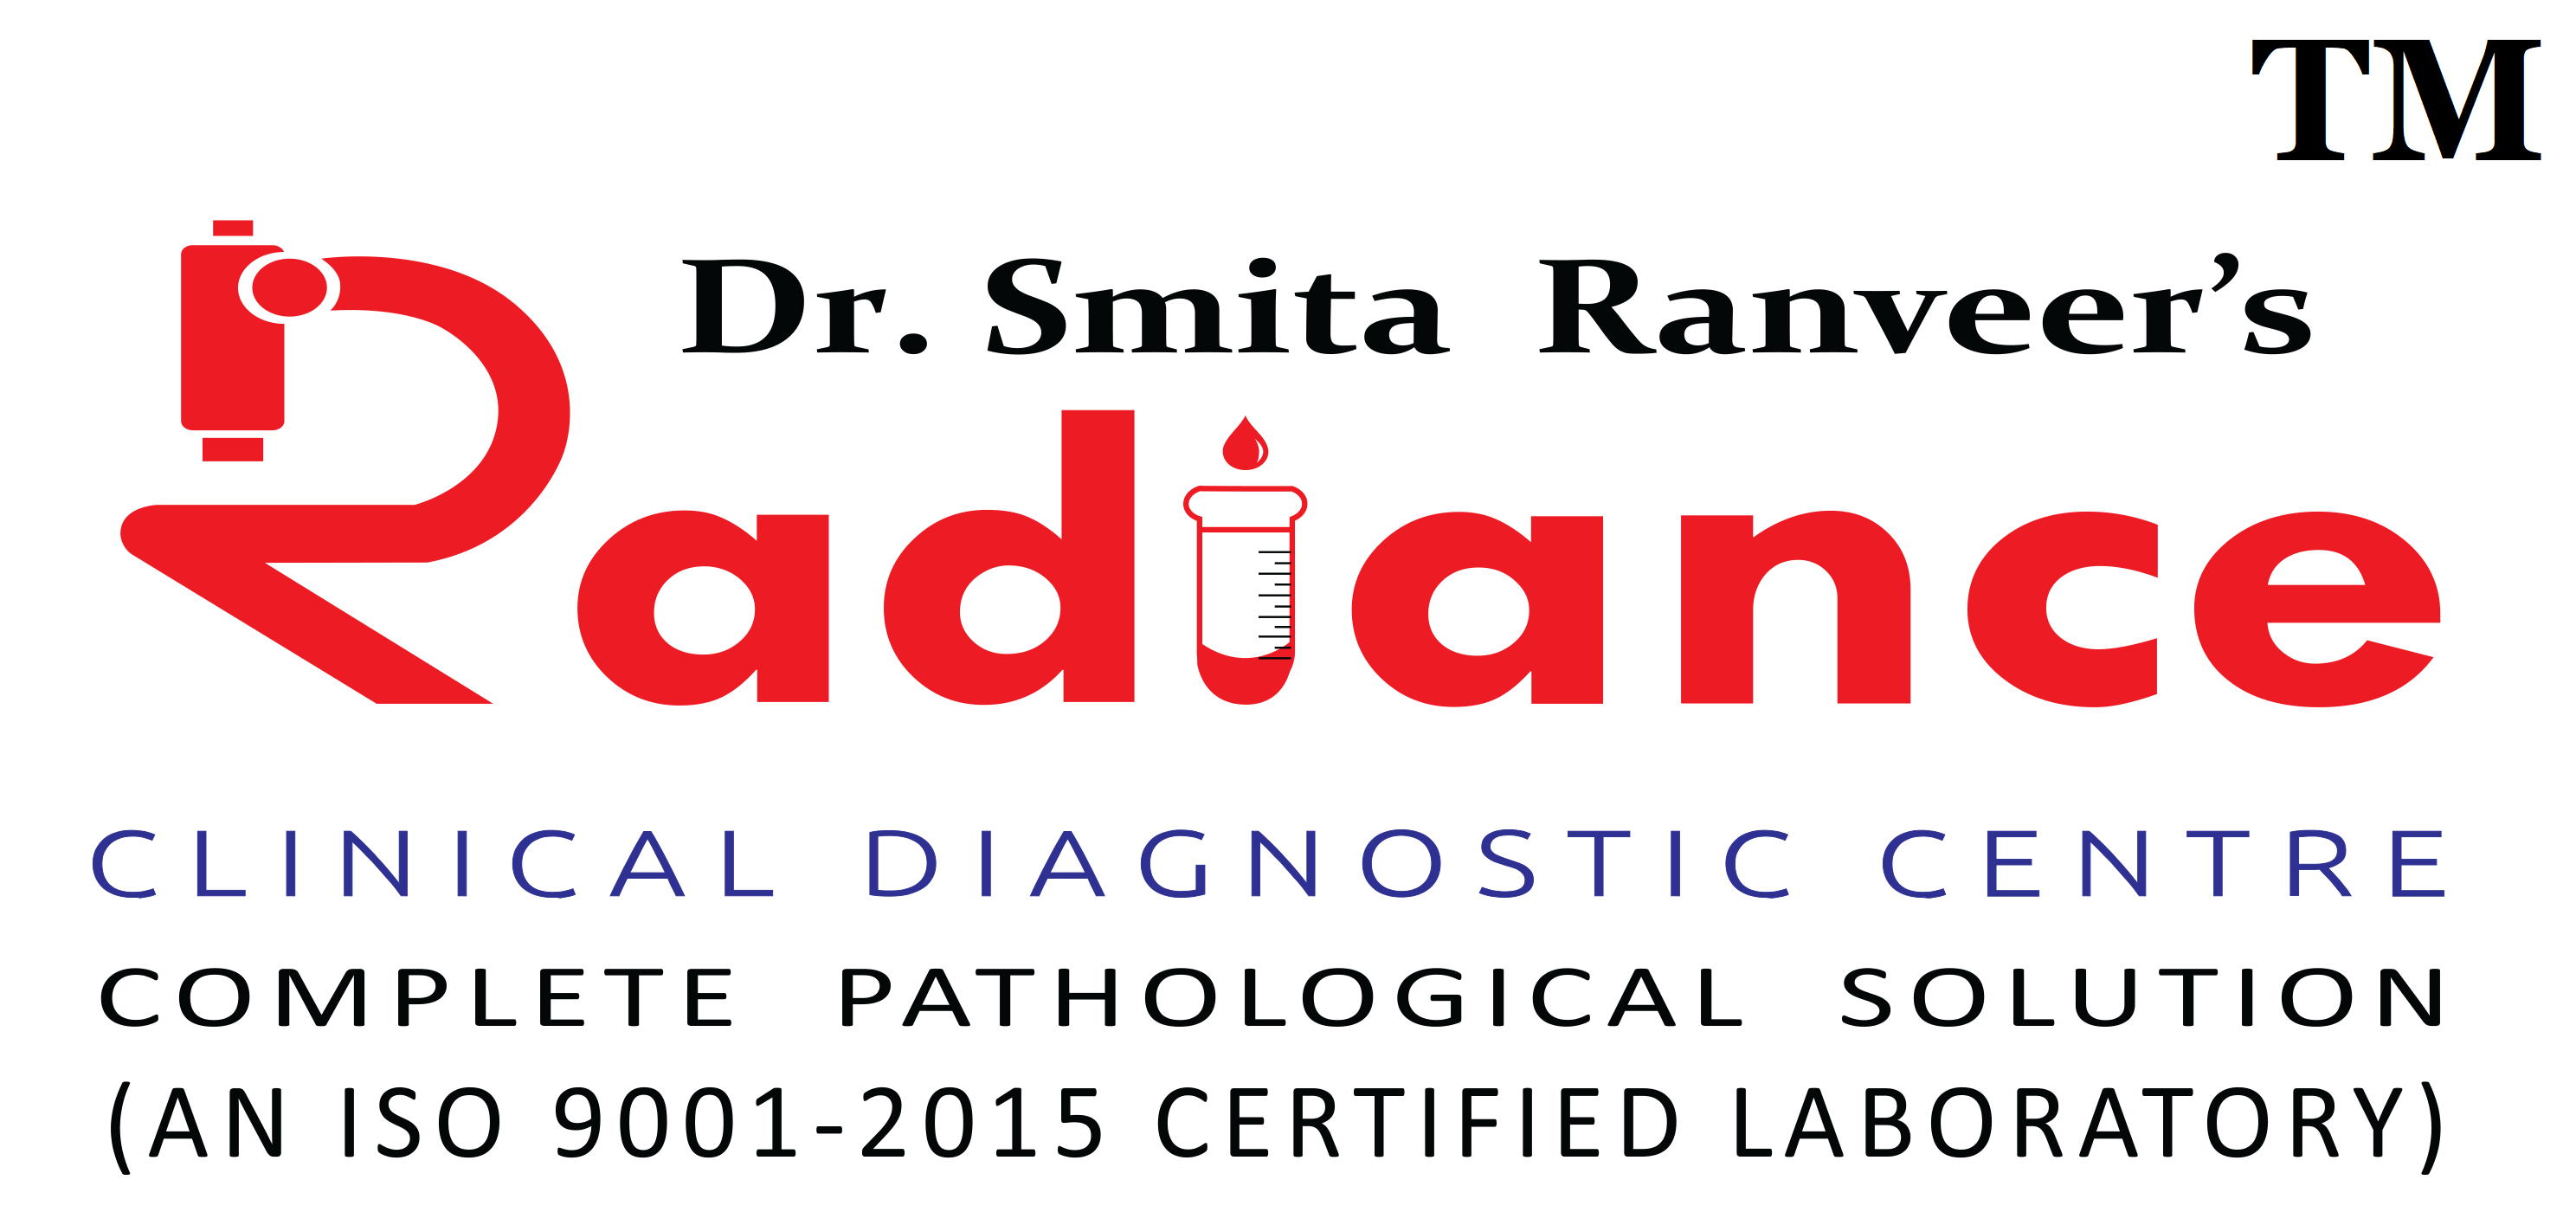 Radiance Clinical Diagnostic Center